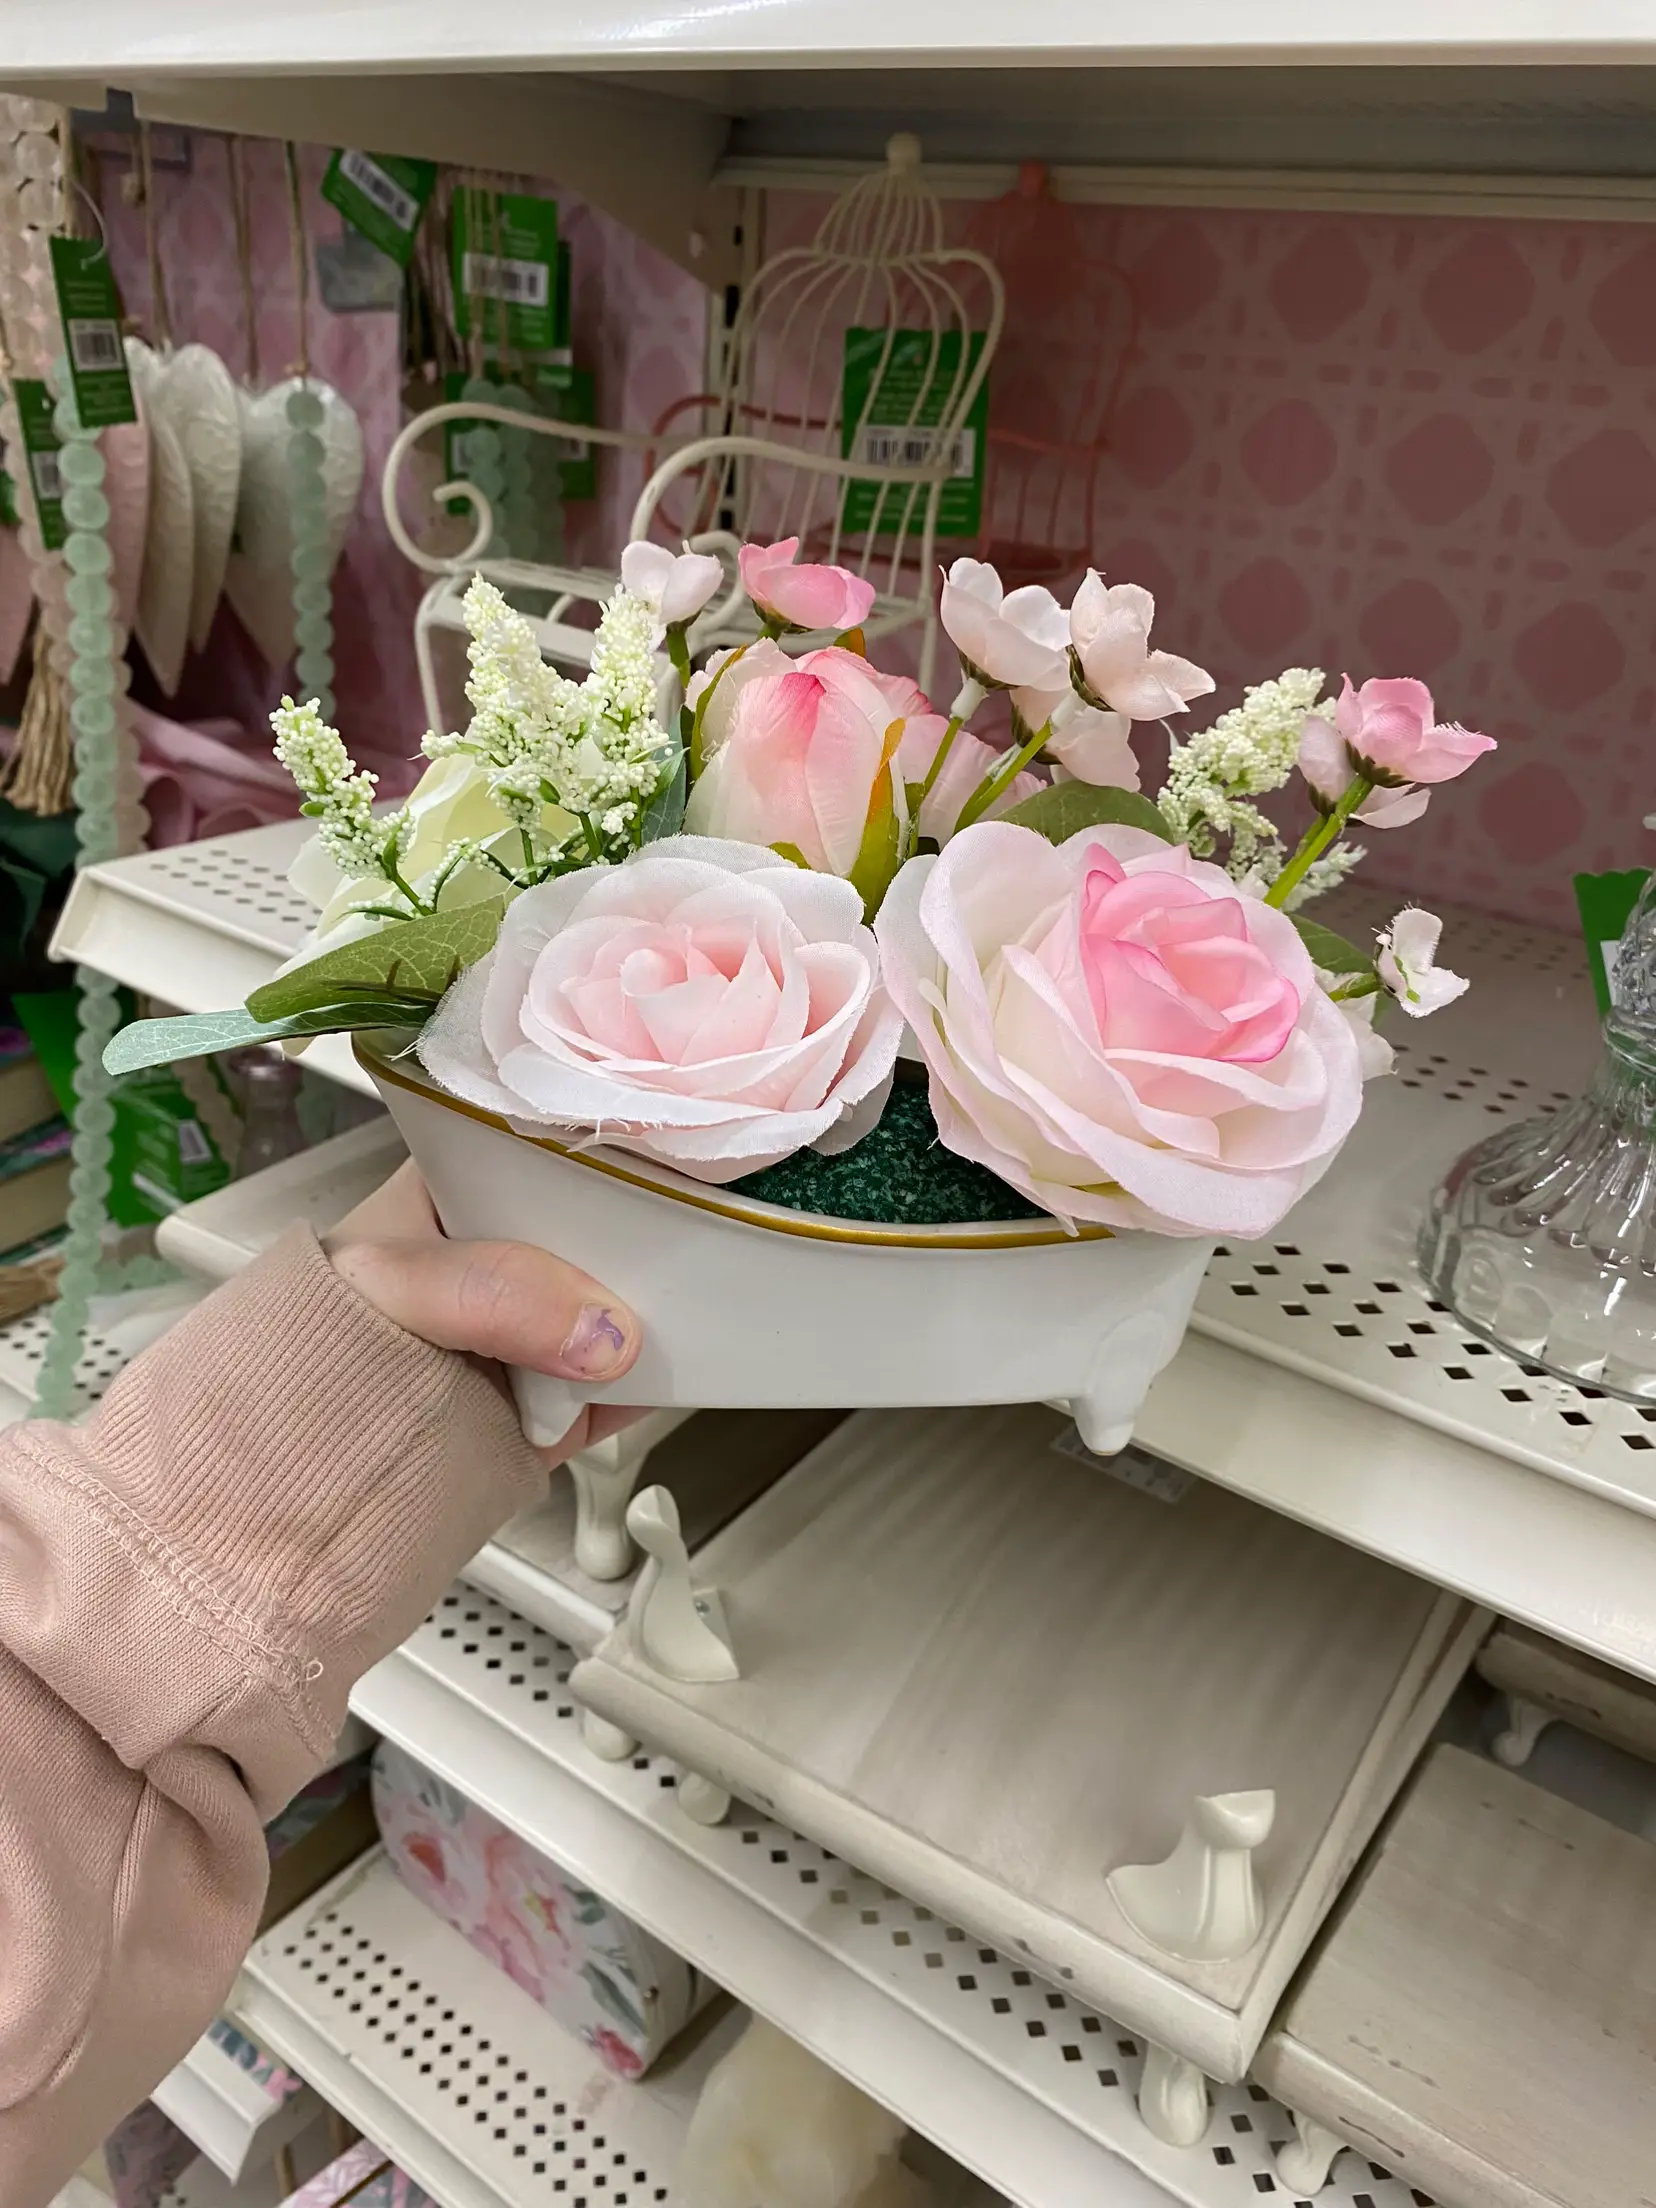  A hand holding a vase with pink flowers in it.